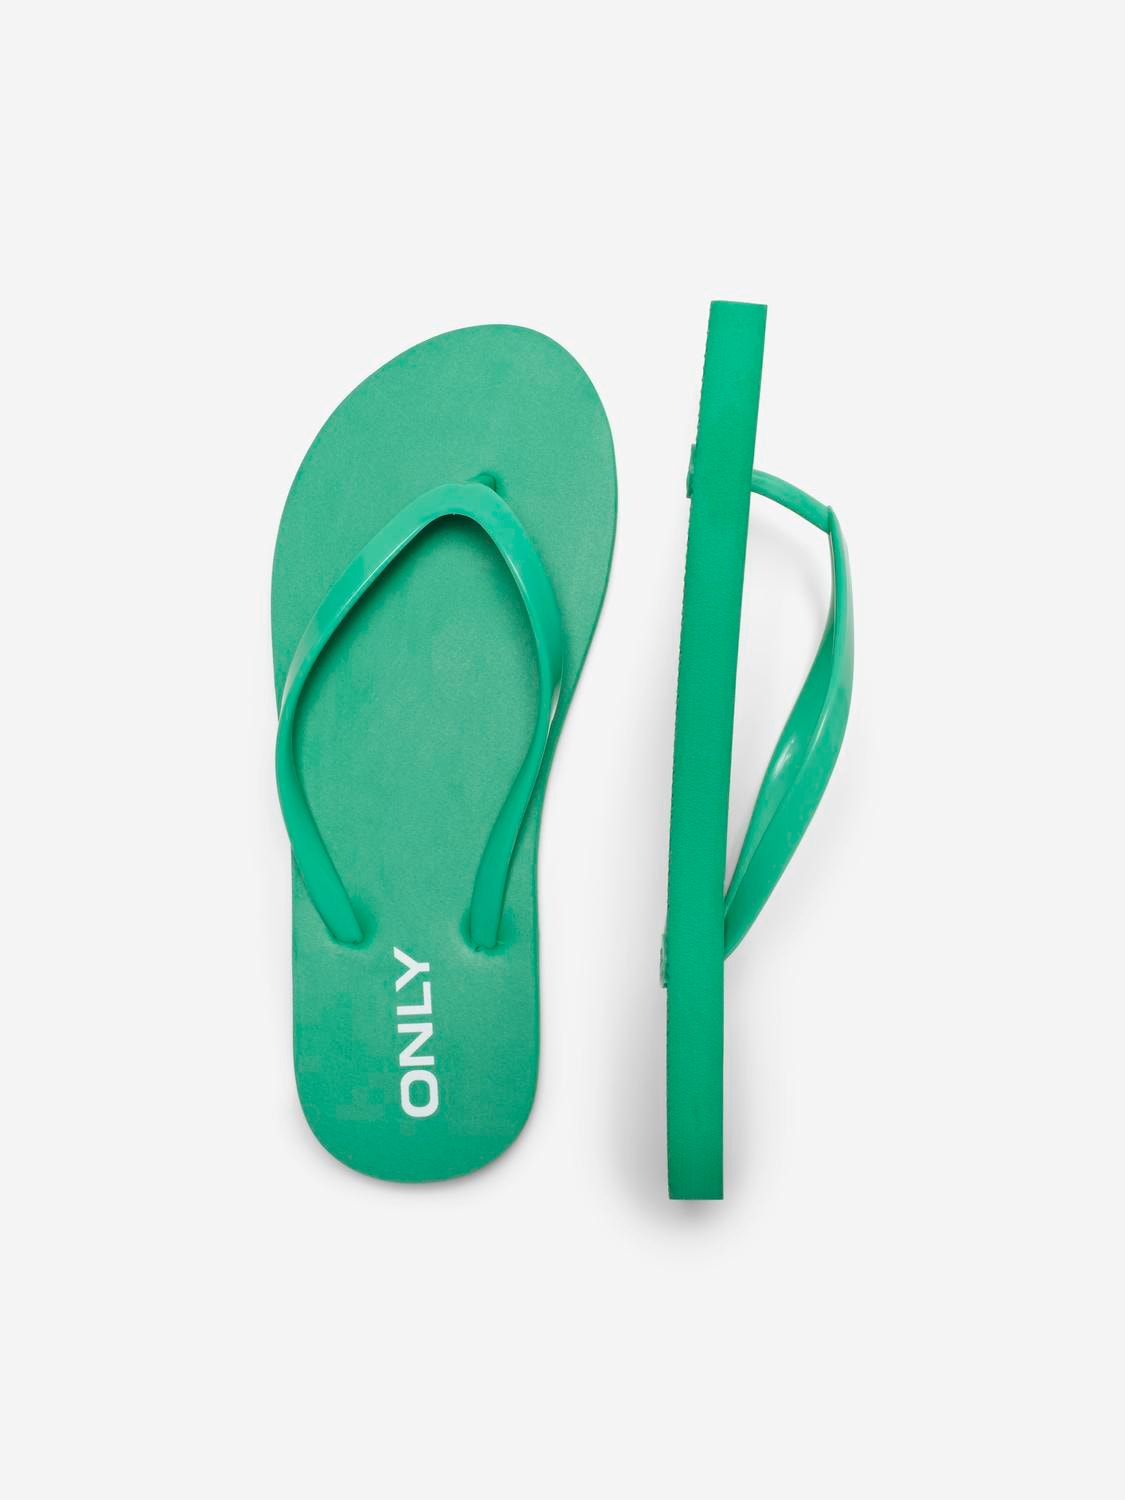 ONLY Sandales Bout ouvert Sangles -Kelly Green - 15289458